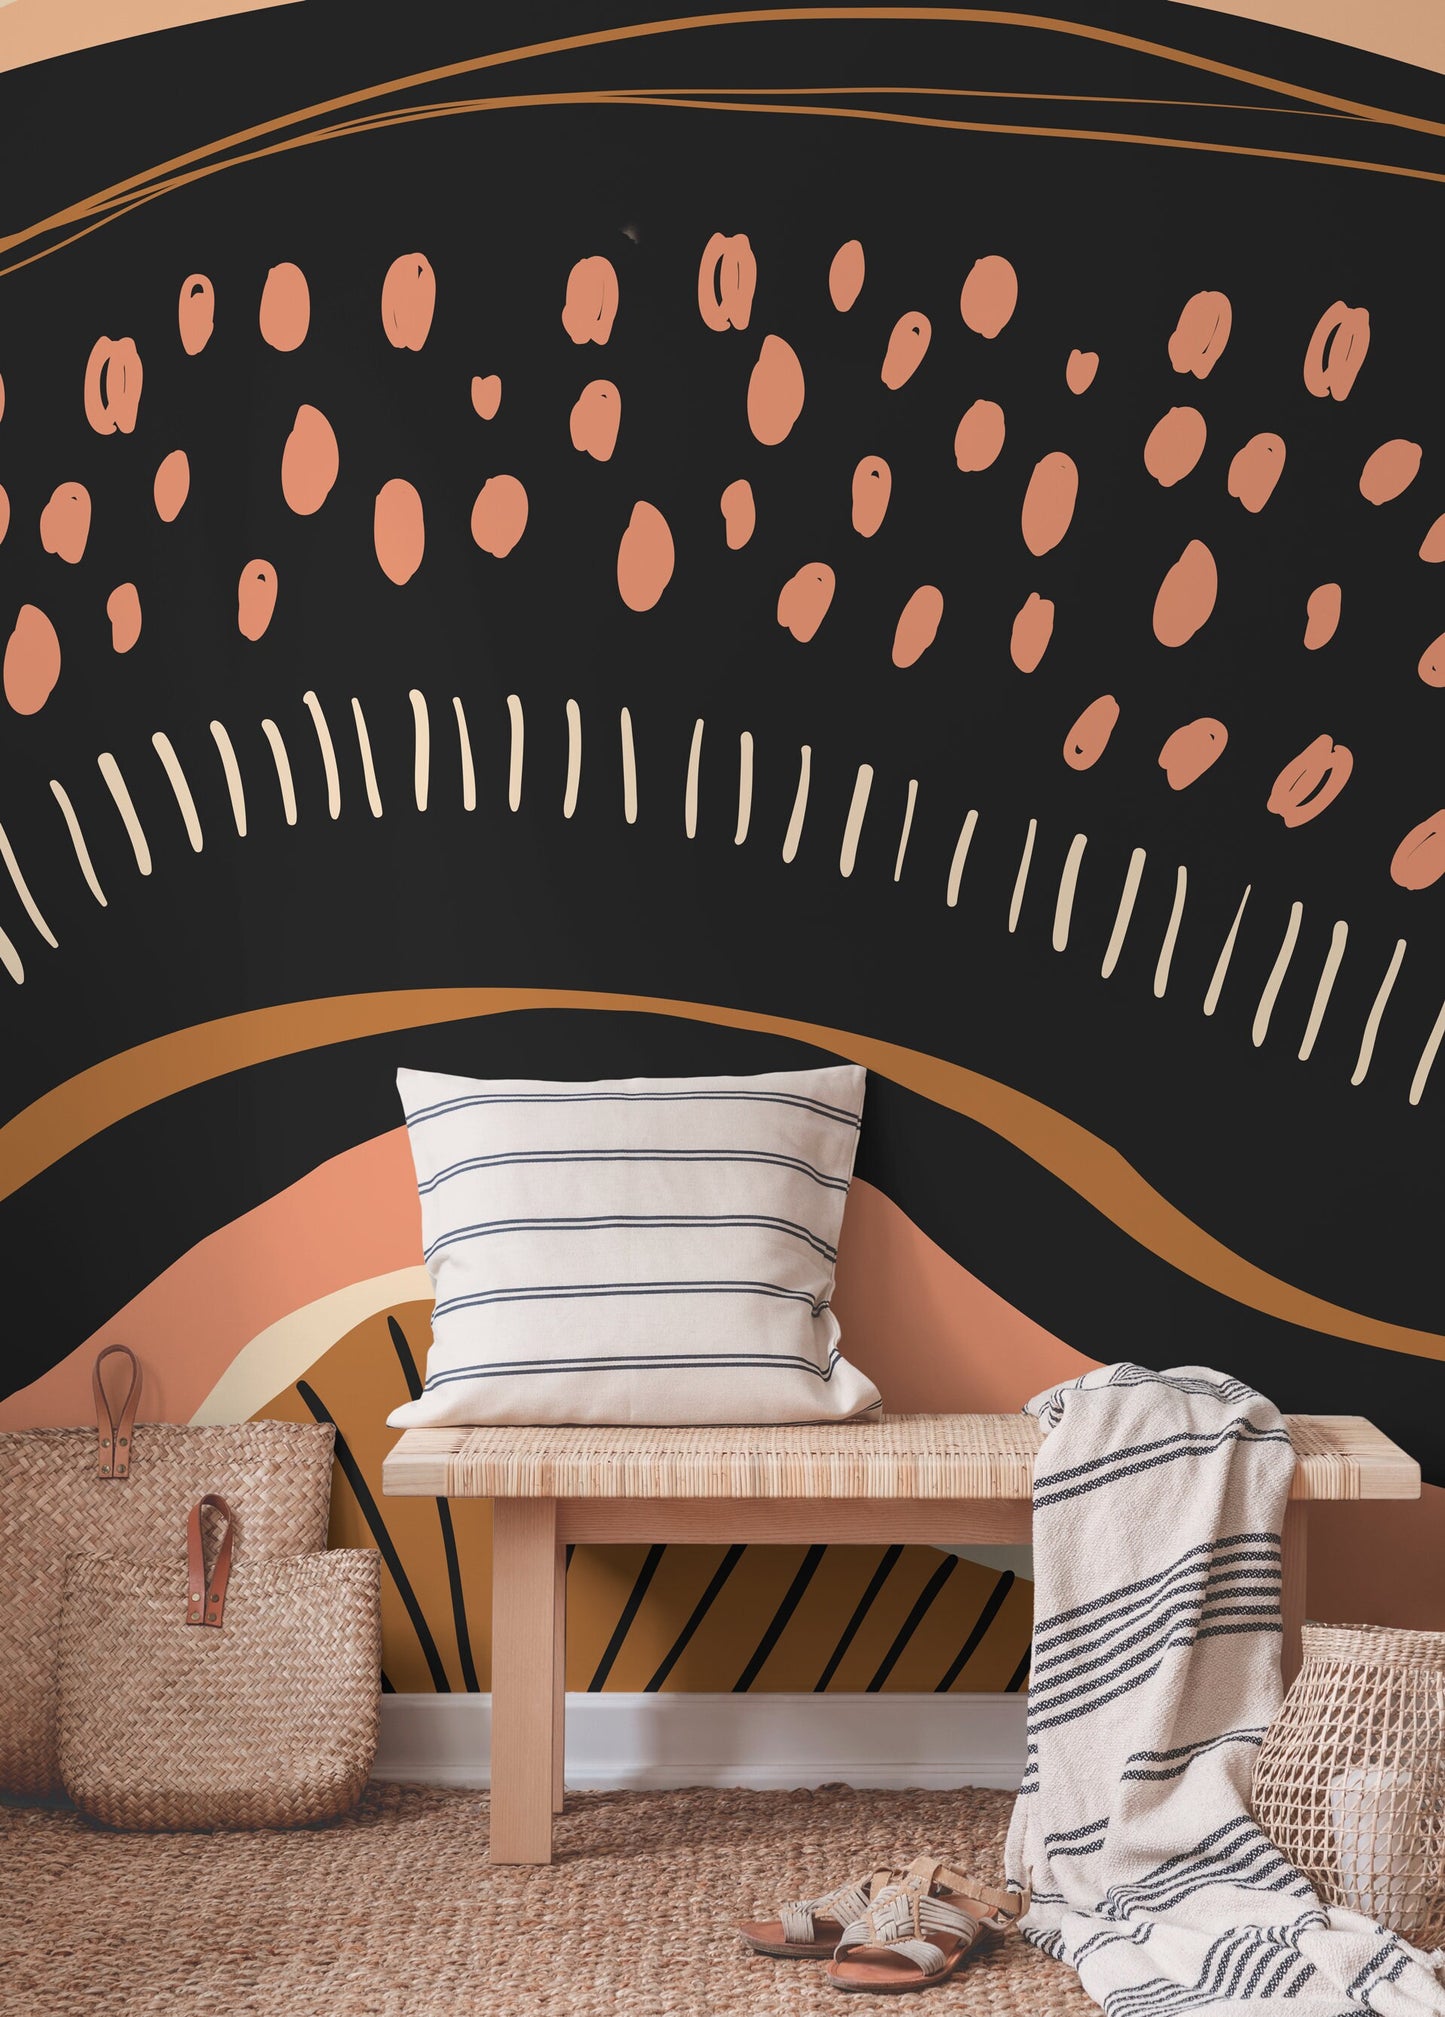 Wallpaper Peel and Stick Wallpaper Removable Wallpaper Home Decor Wall Art Wall Decor Room Decor / Abstract Orange Wallpaper - C412